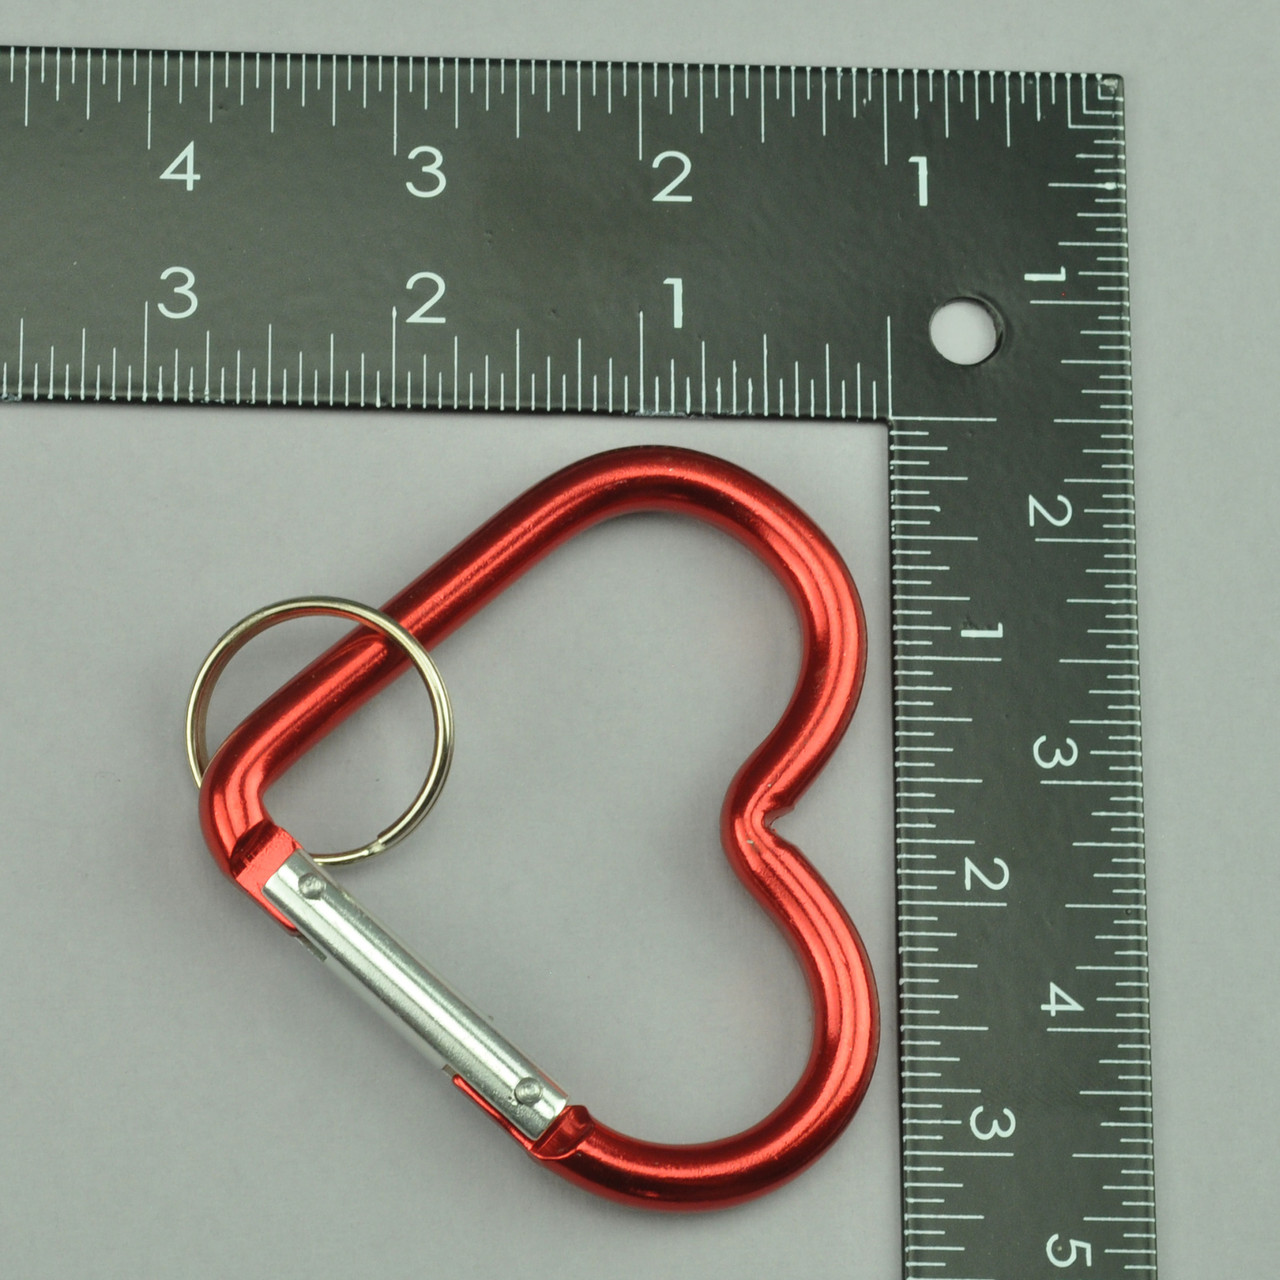 Shop for and Buy Heart Shape Carabiner Clip Keychain at . Large  selection and bulk discounts available.